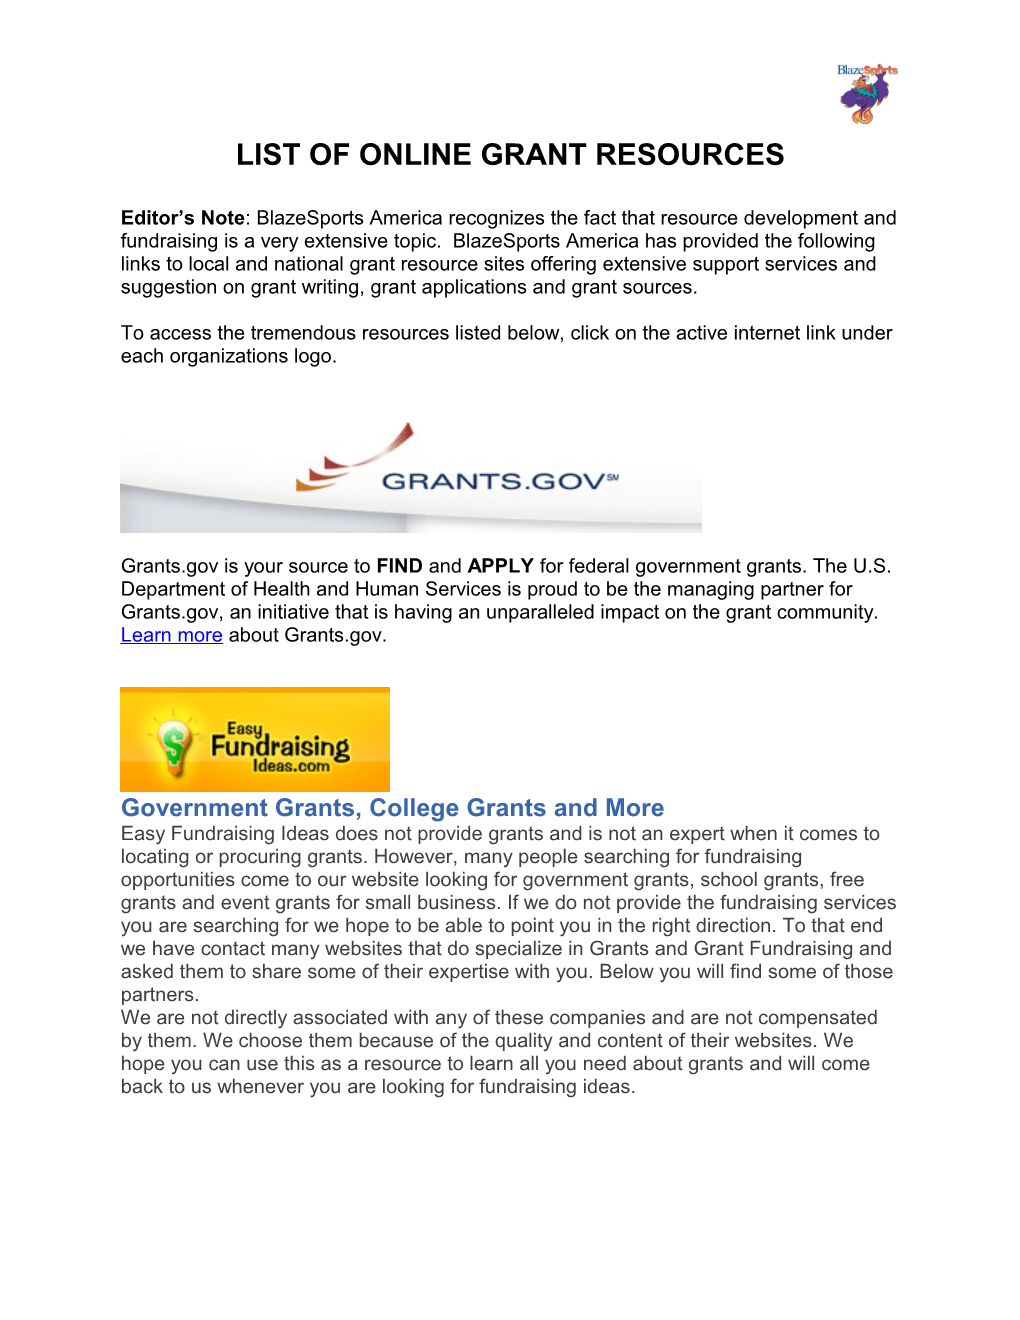 List of Online Grant Resources